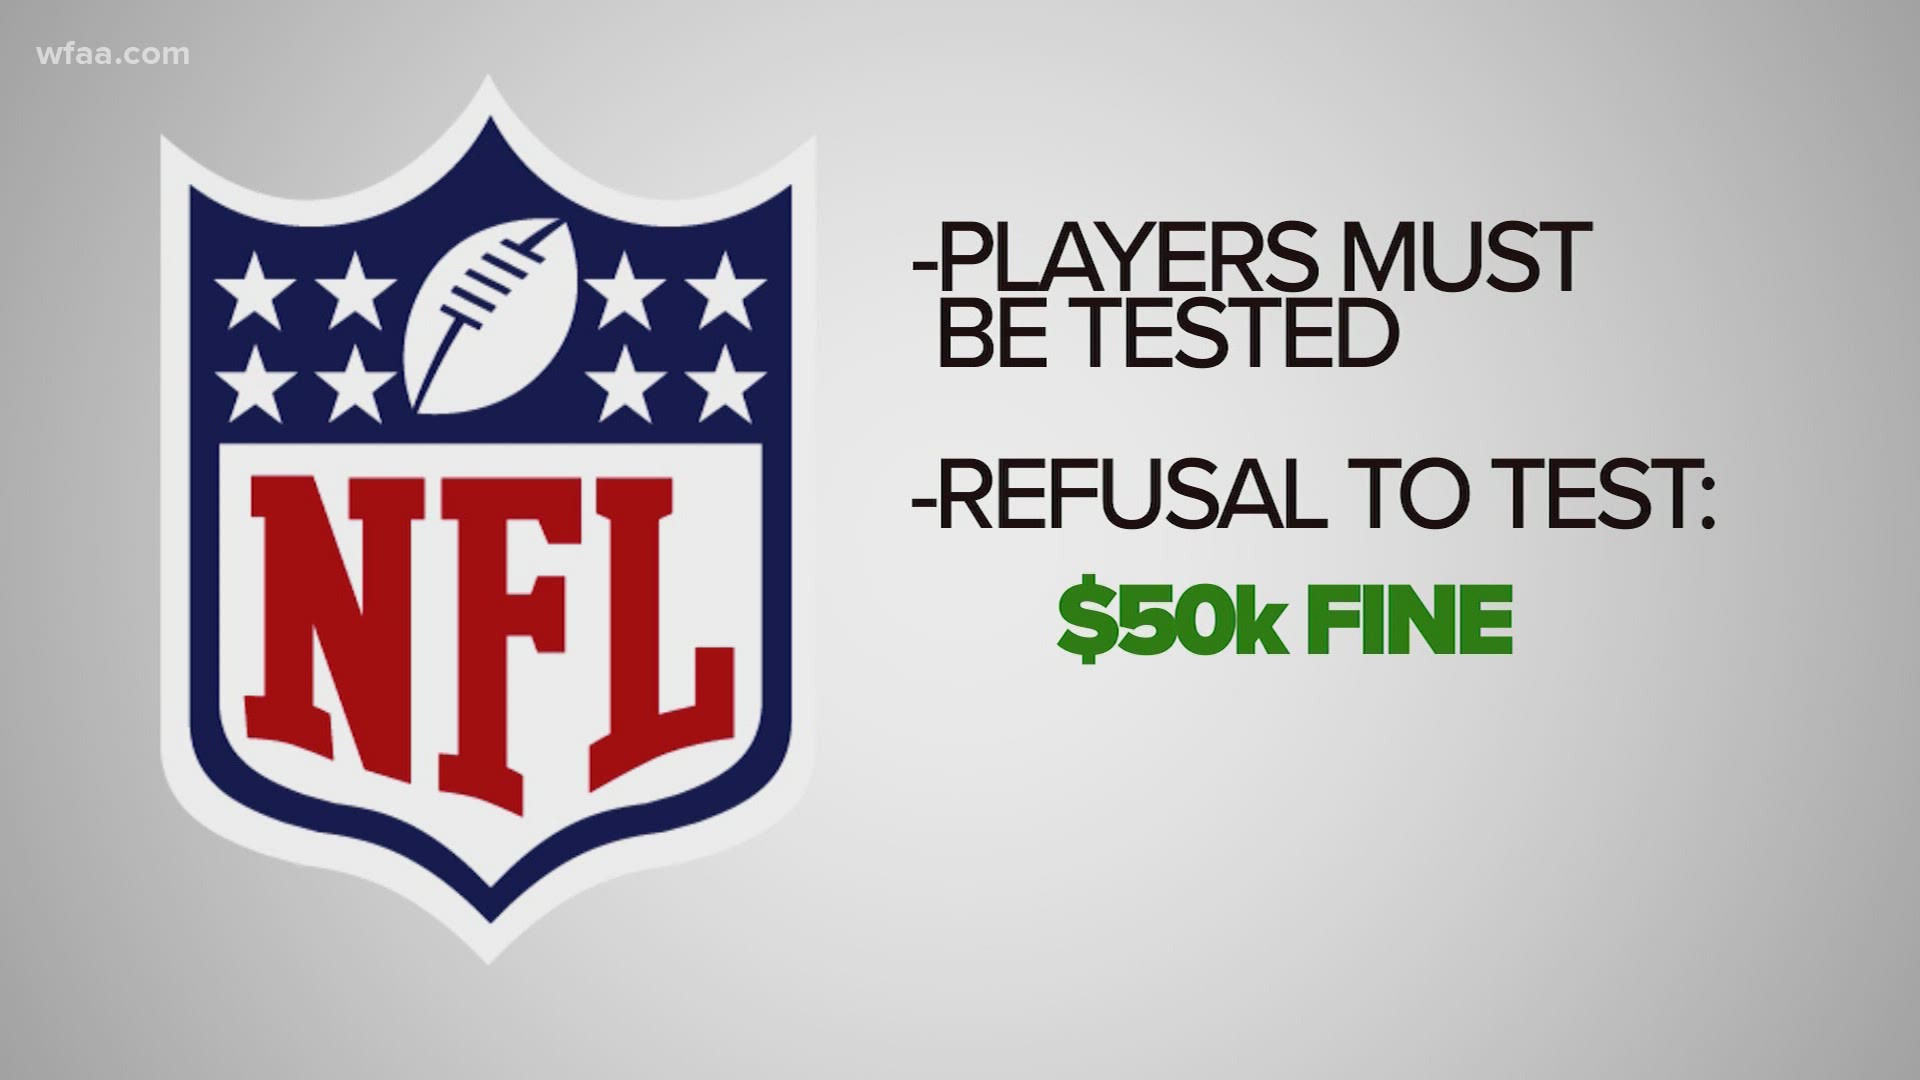 NFL players have until Thursday to opt-out of playing.